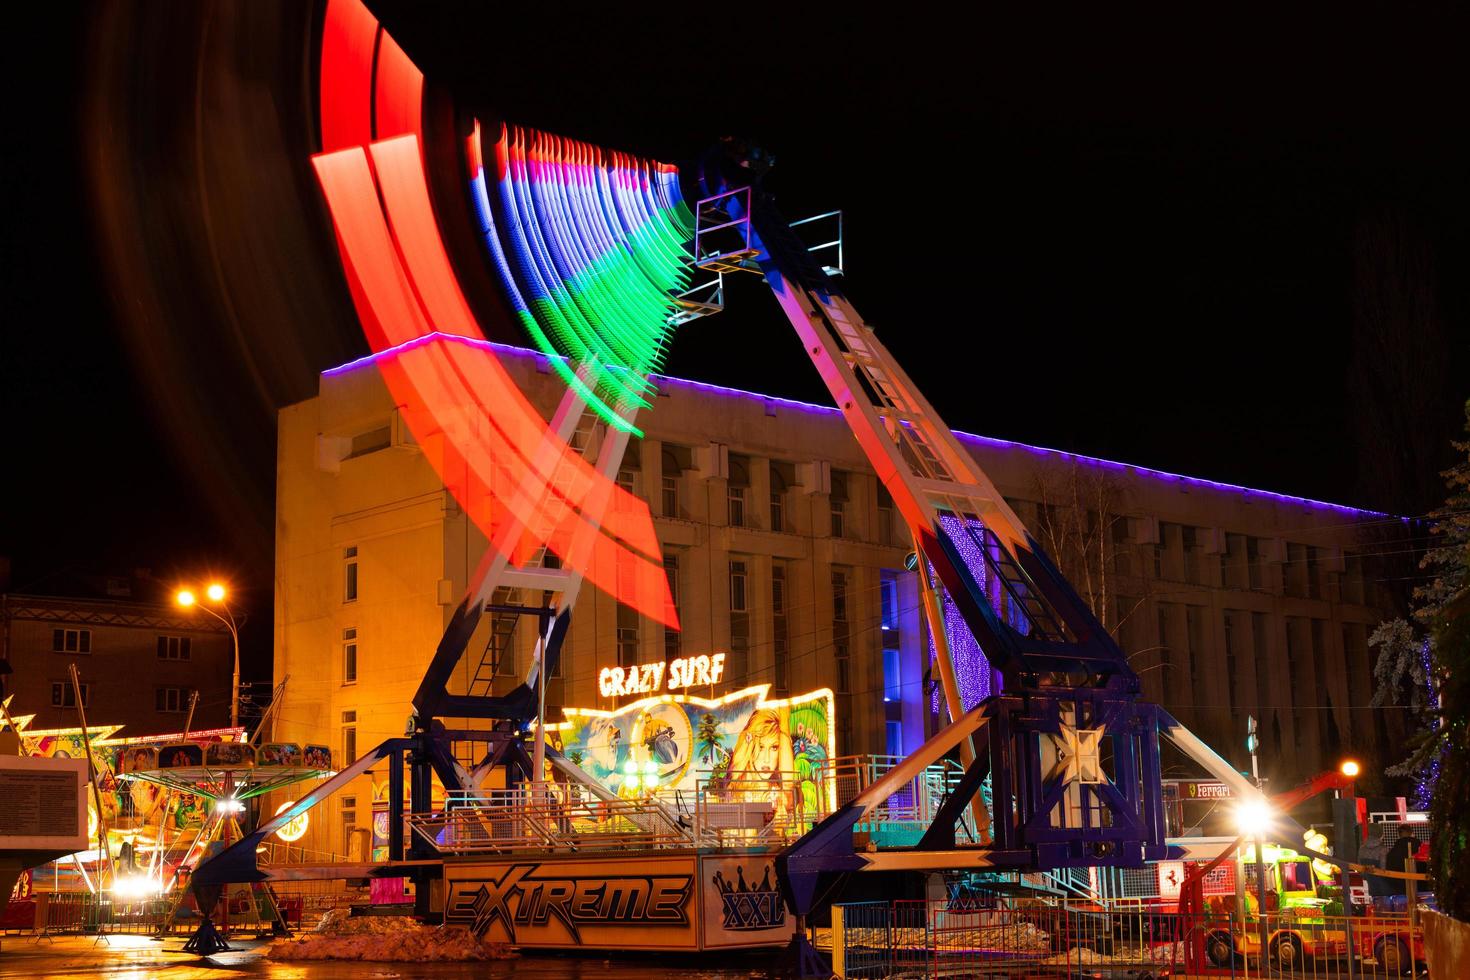 Moscow, Russia - January 02, 2021. View of the New Year's, winter fair, carousels, attractions. fun. photo